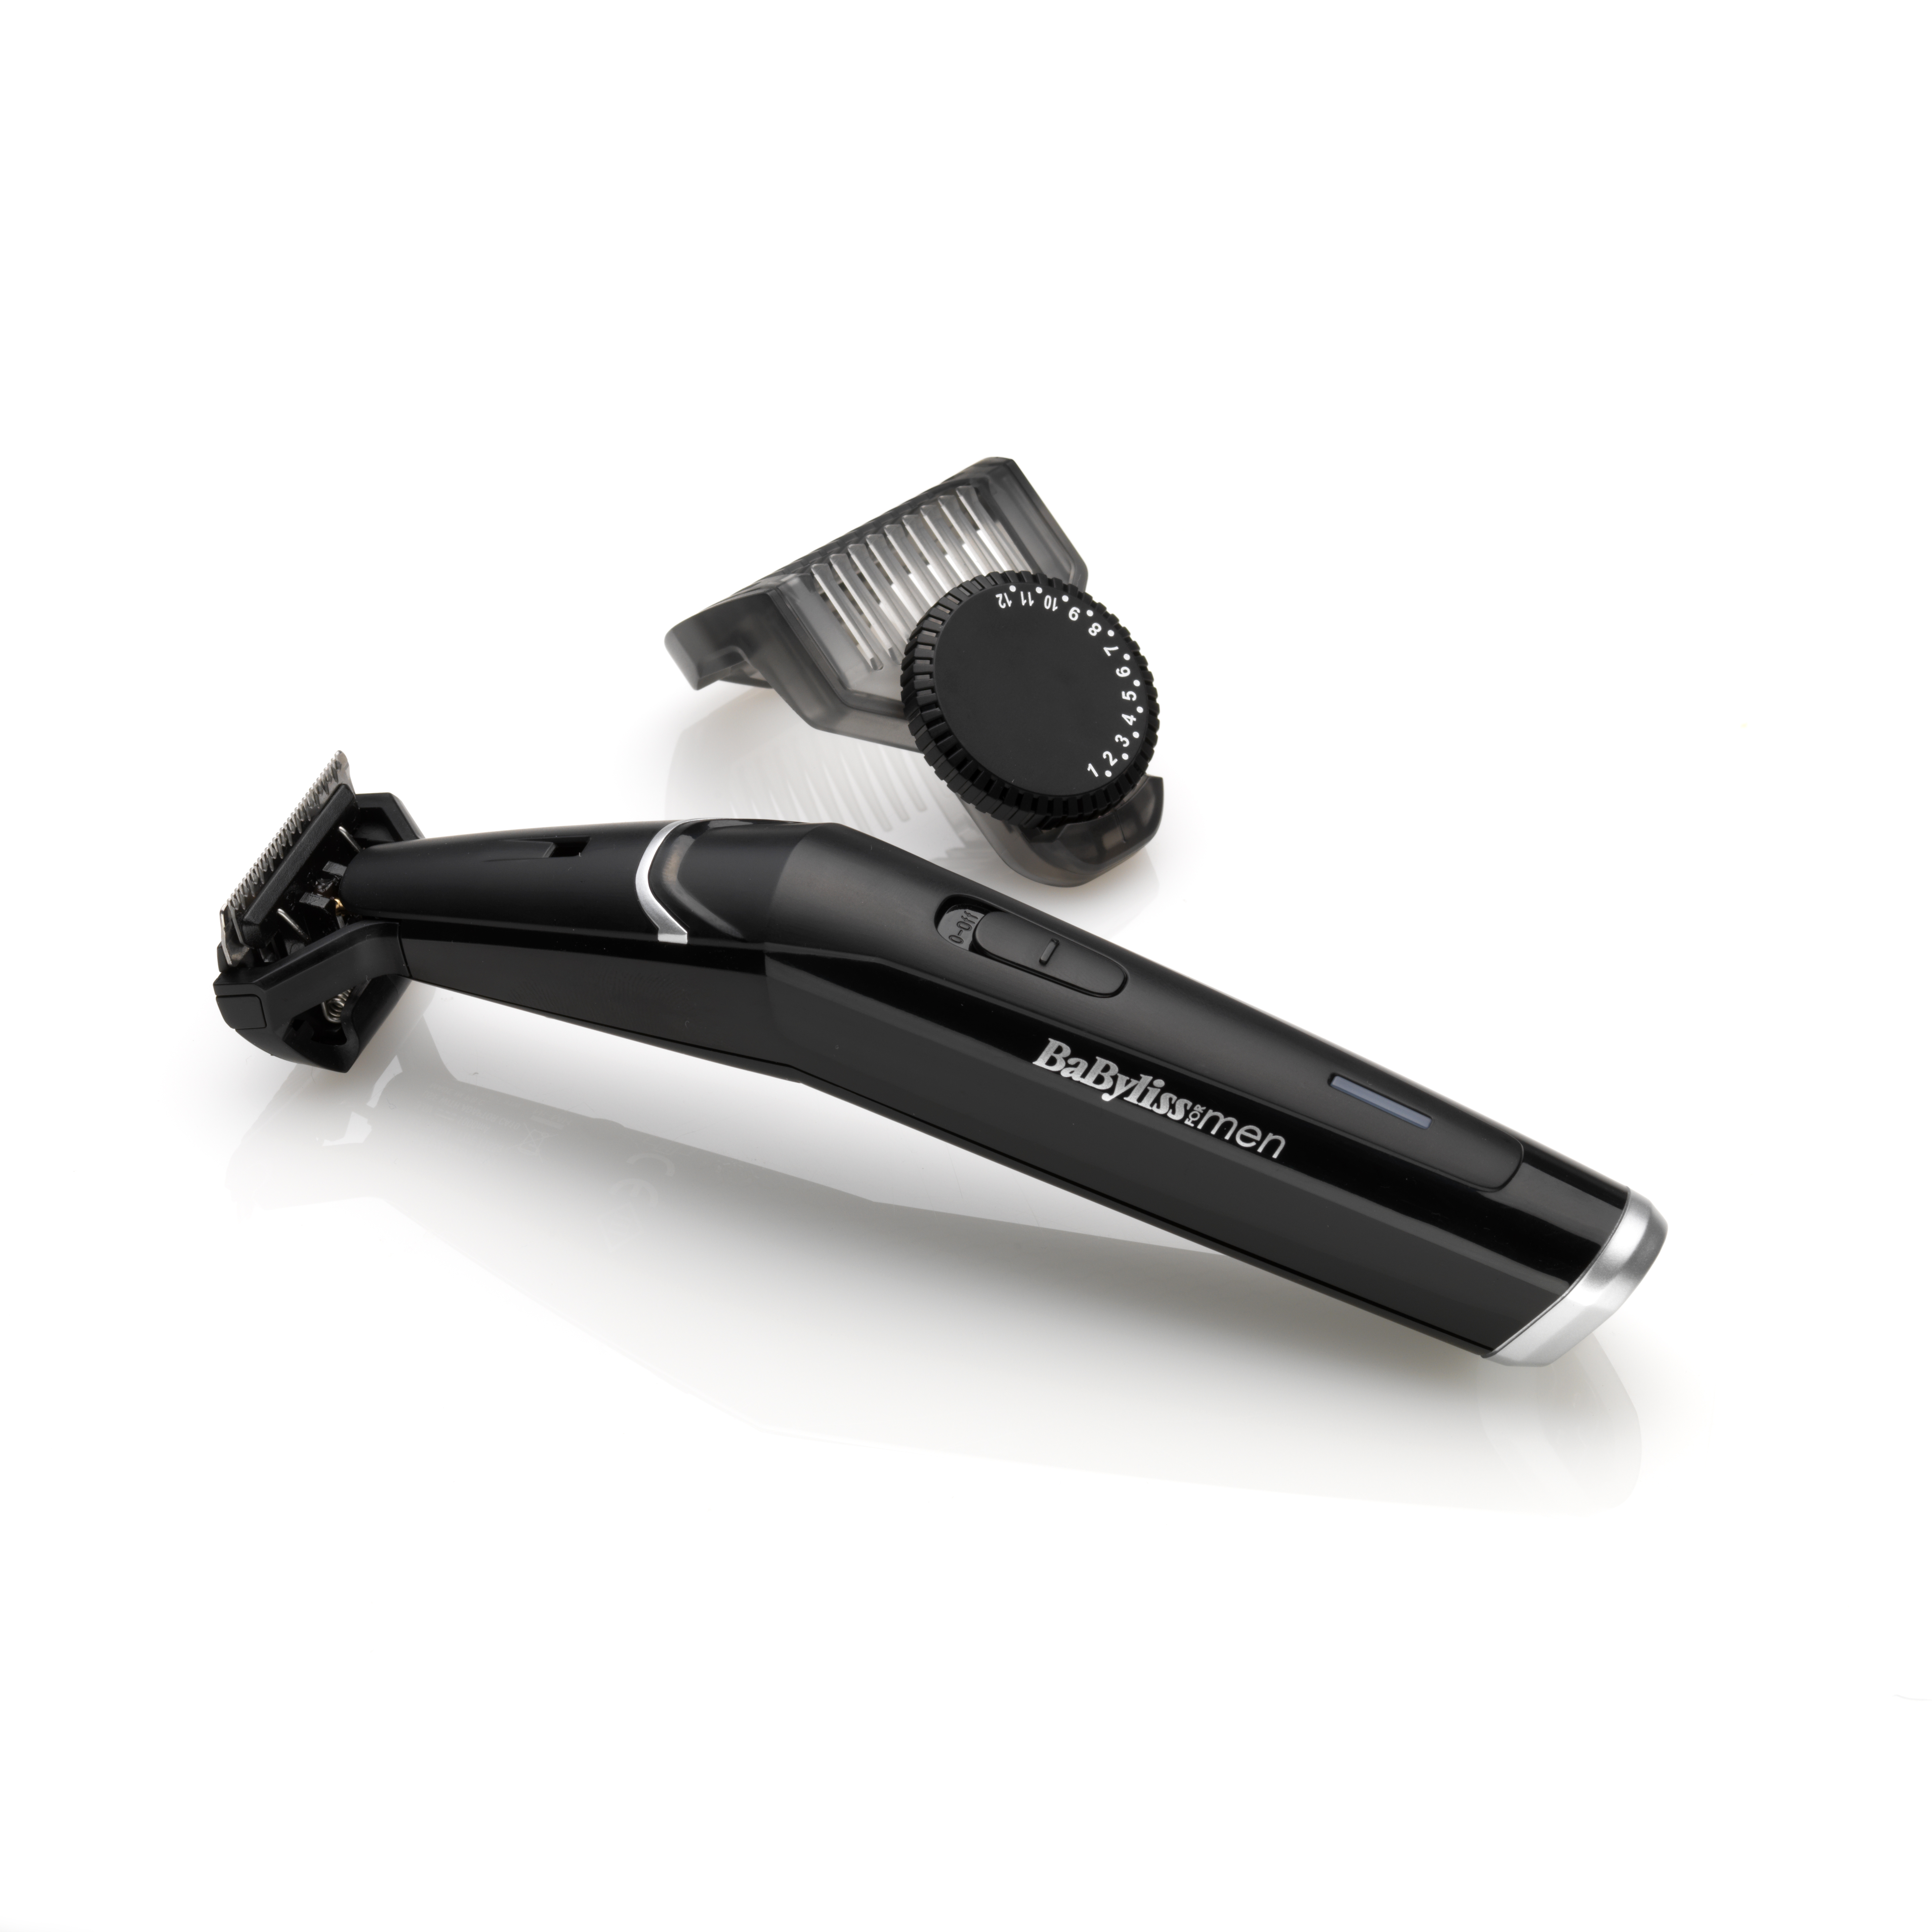 babyliss beard master review